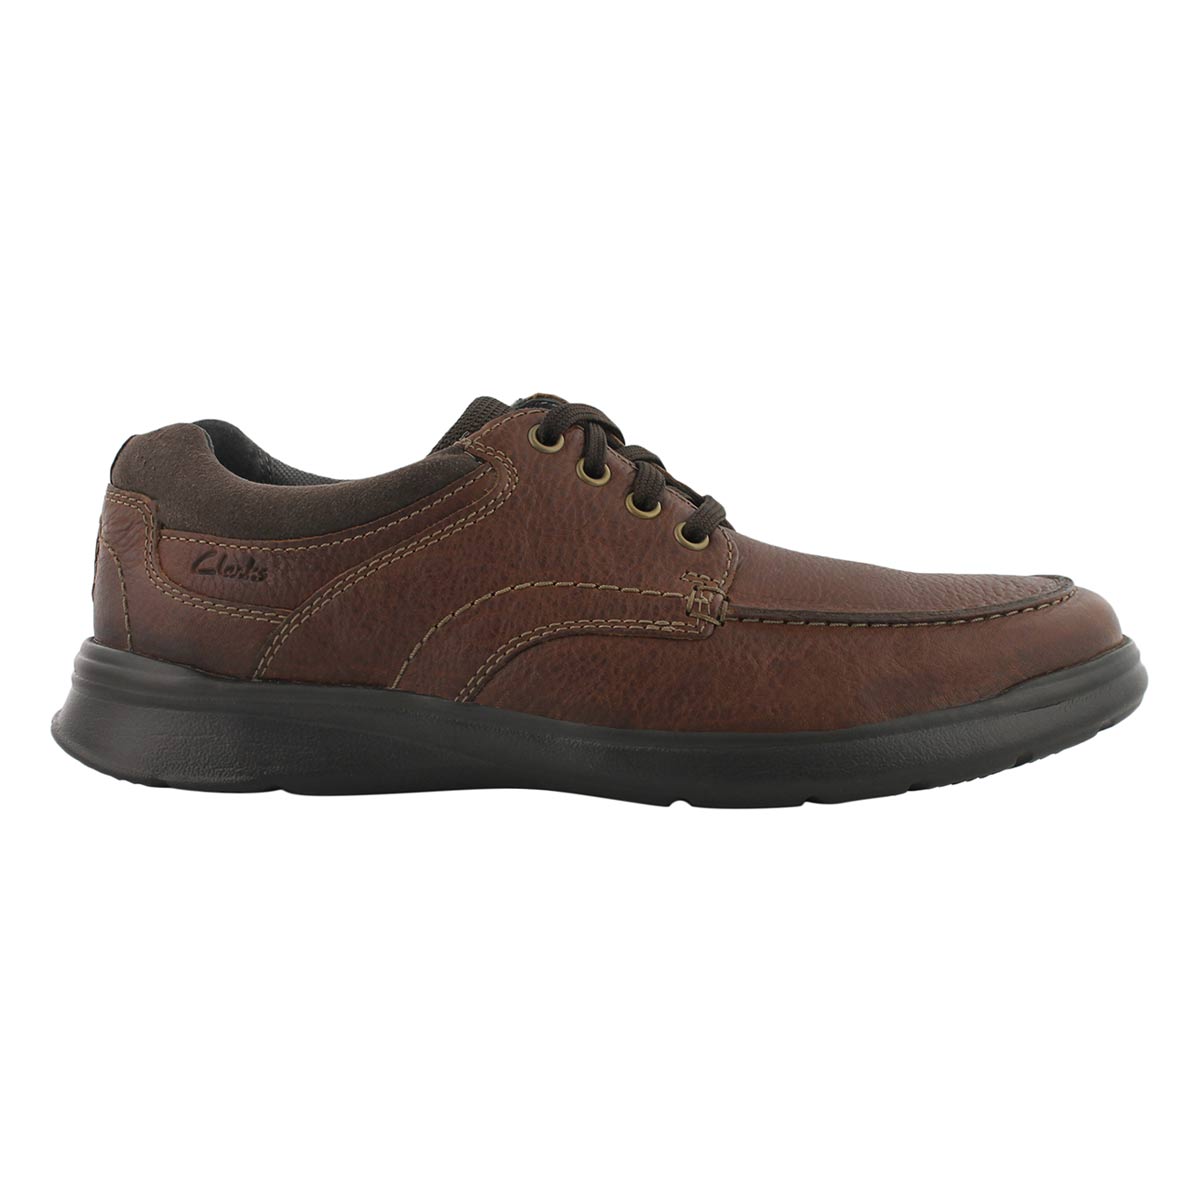 Clarks Men's Cotrell Edge Lace-Up Casual Shoe | eBay